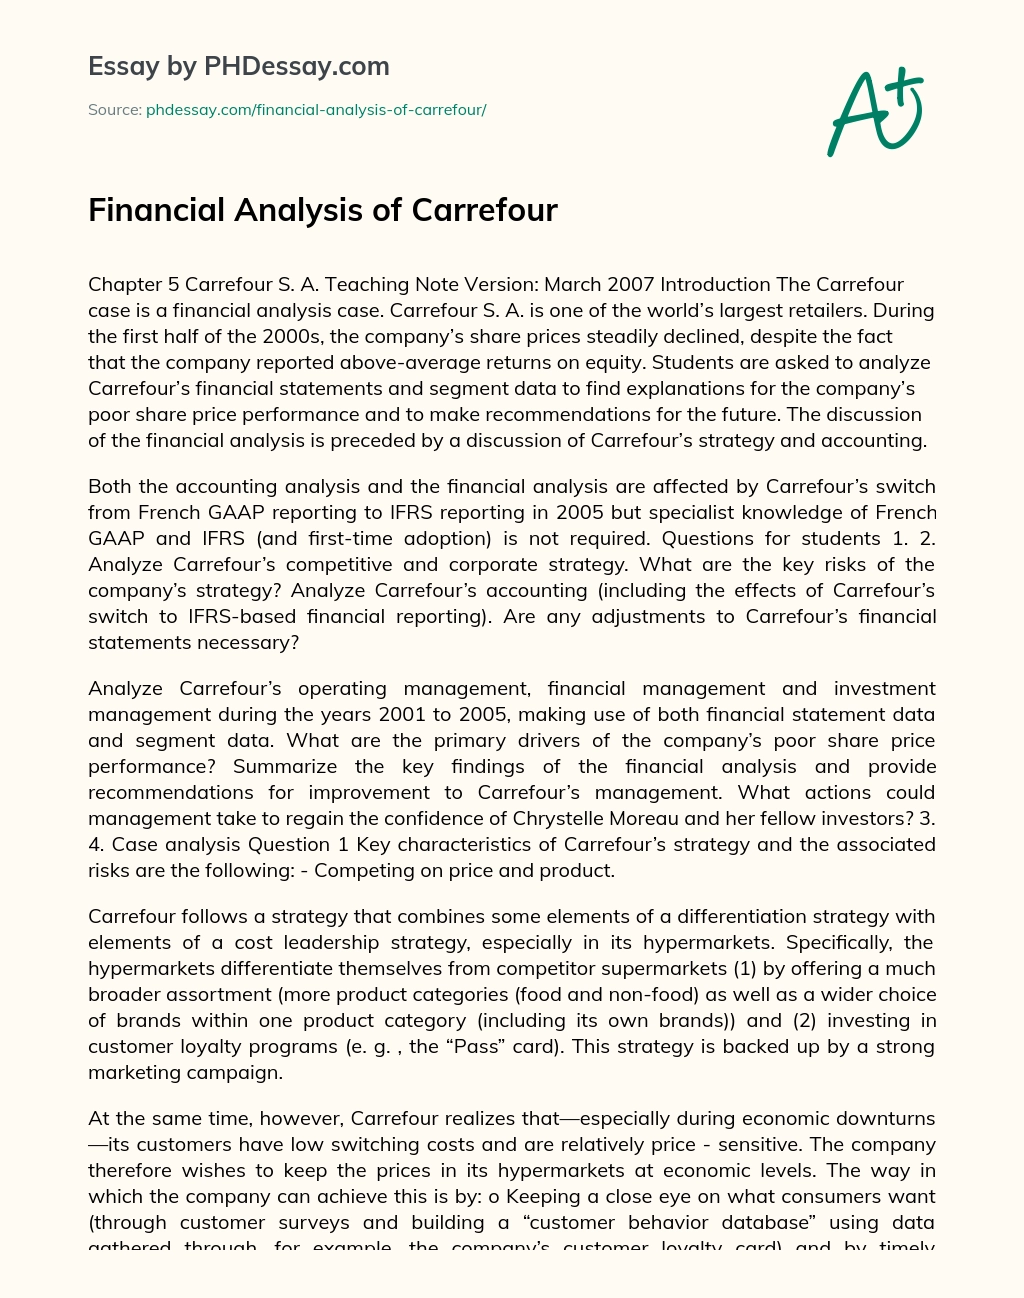 Financial Analysis of Carrefour essay